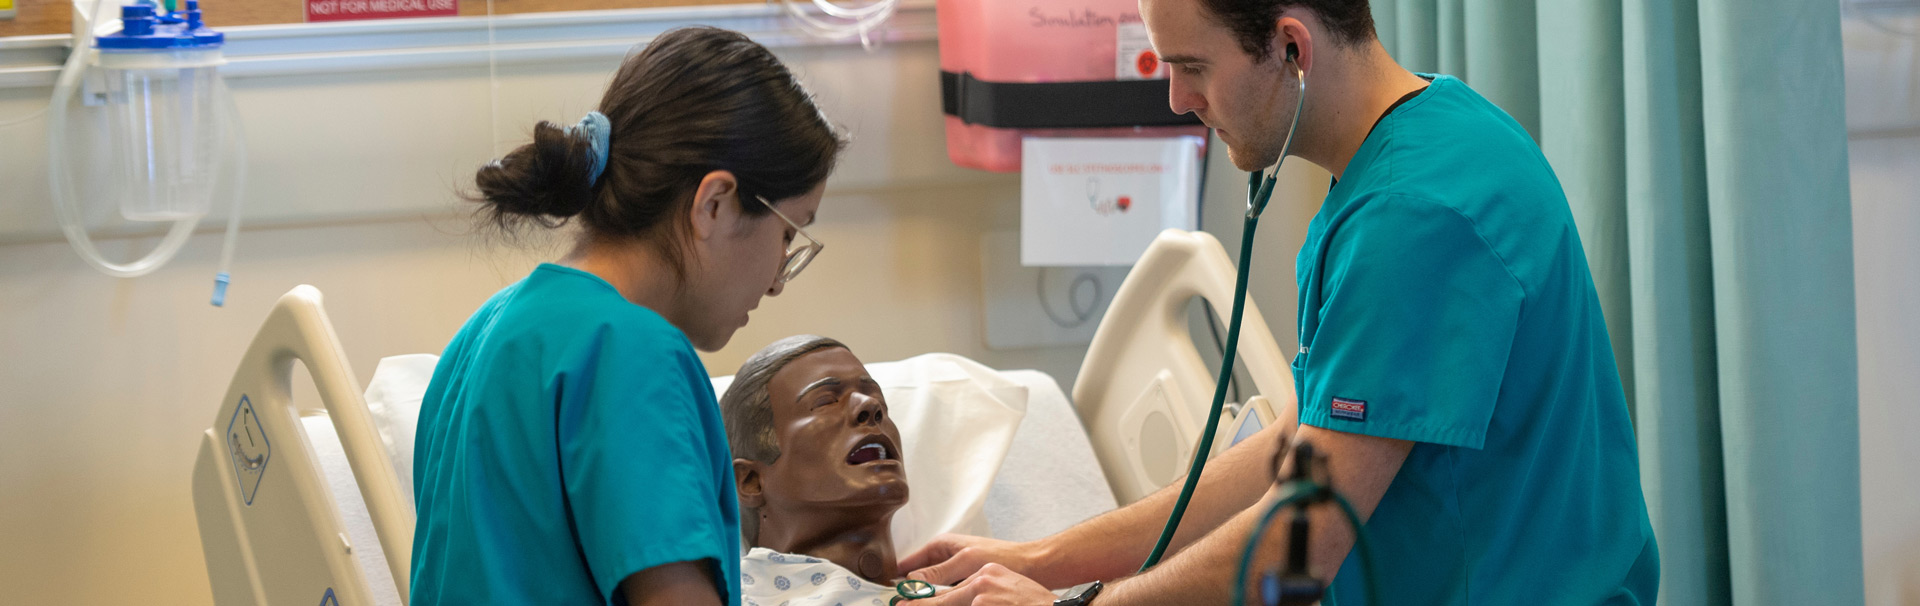 Two nursing students in scrubs examine a medical dummy in the Simulation Lab